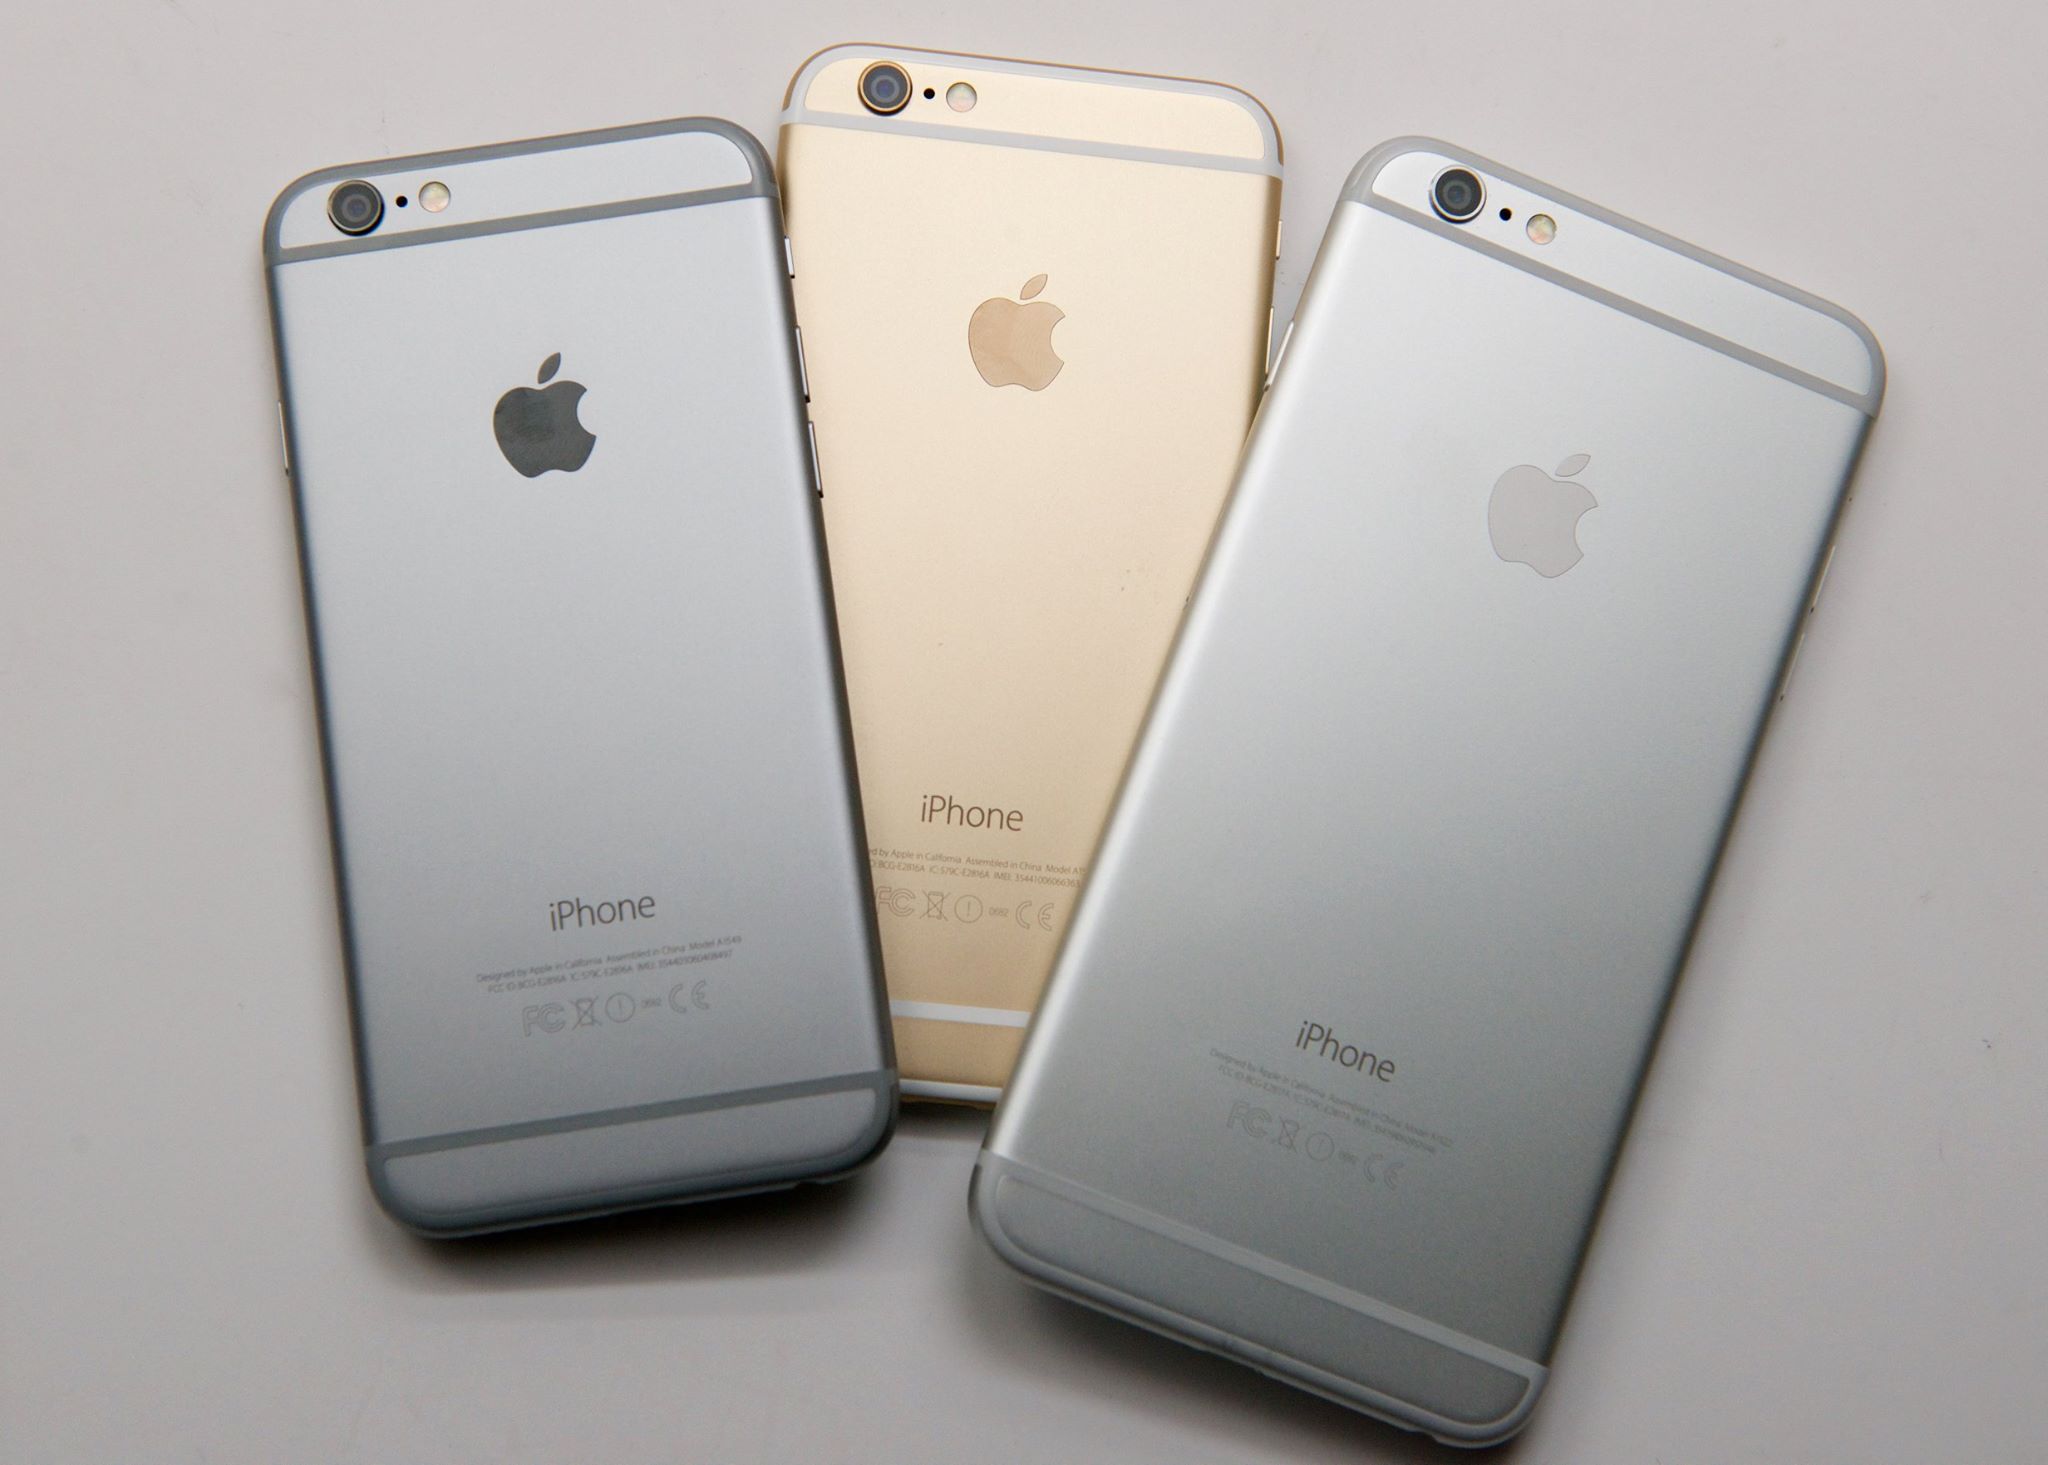 Save with iPhone 6 Plus and iPhone 6 deals.